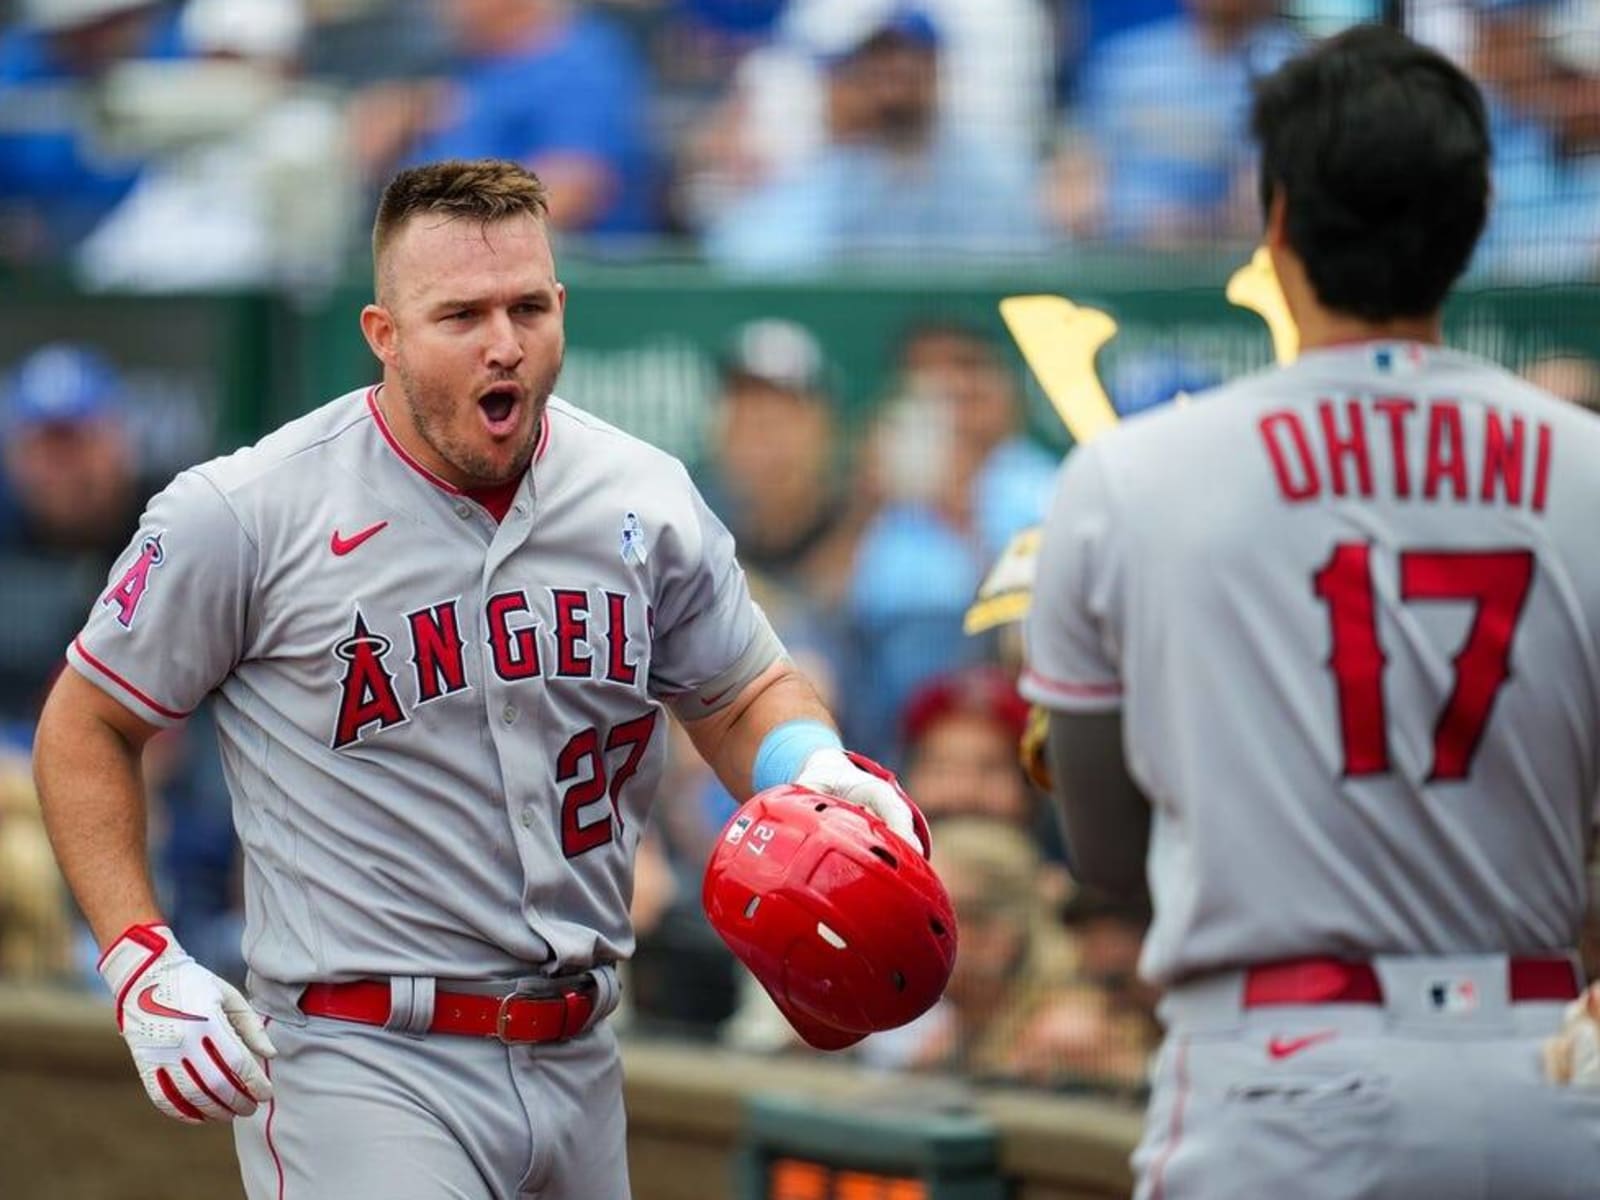 Ohtani, Trout homer to lead Angels past Royals 5-2